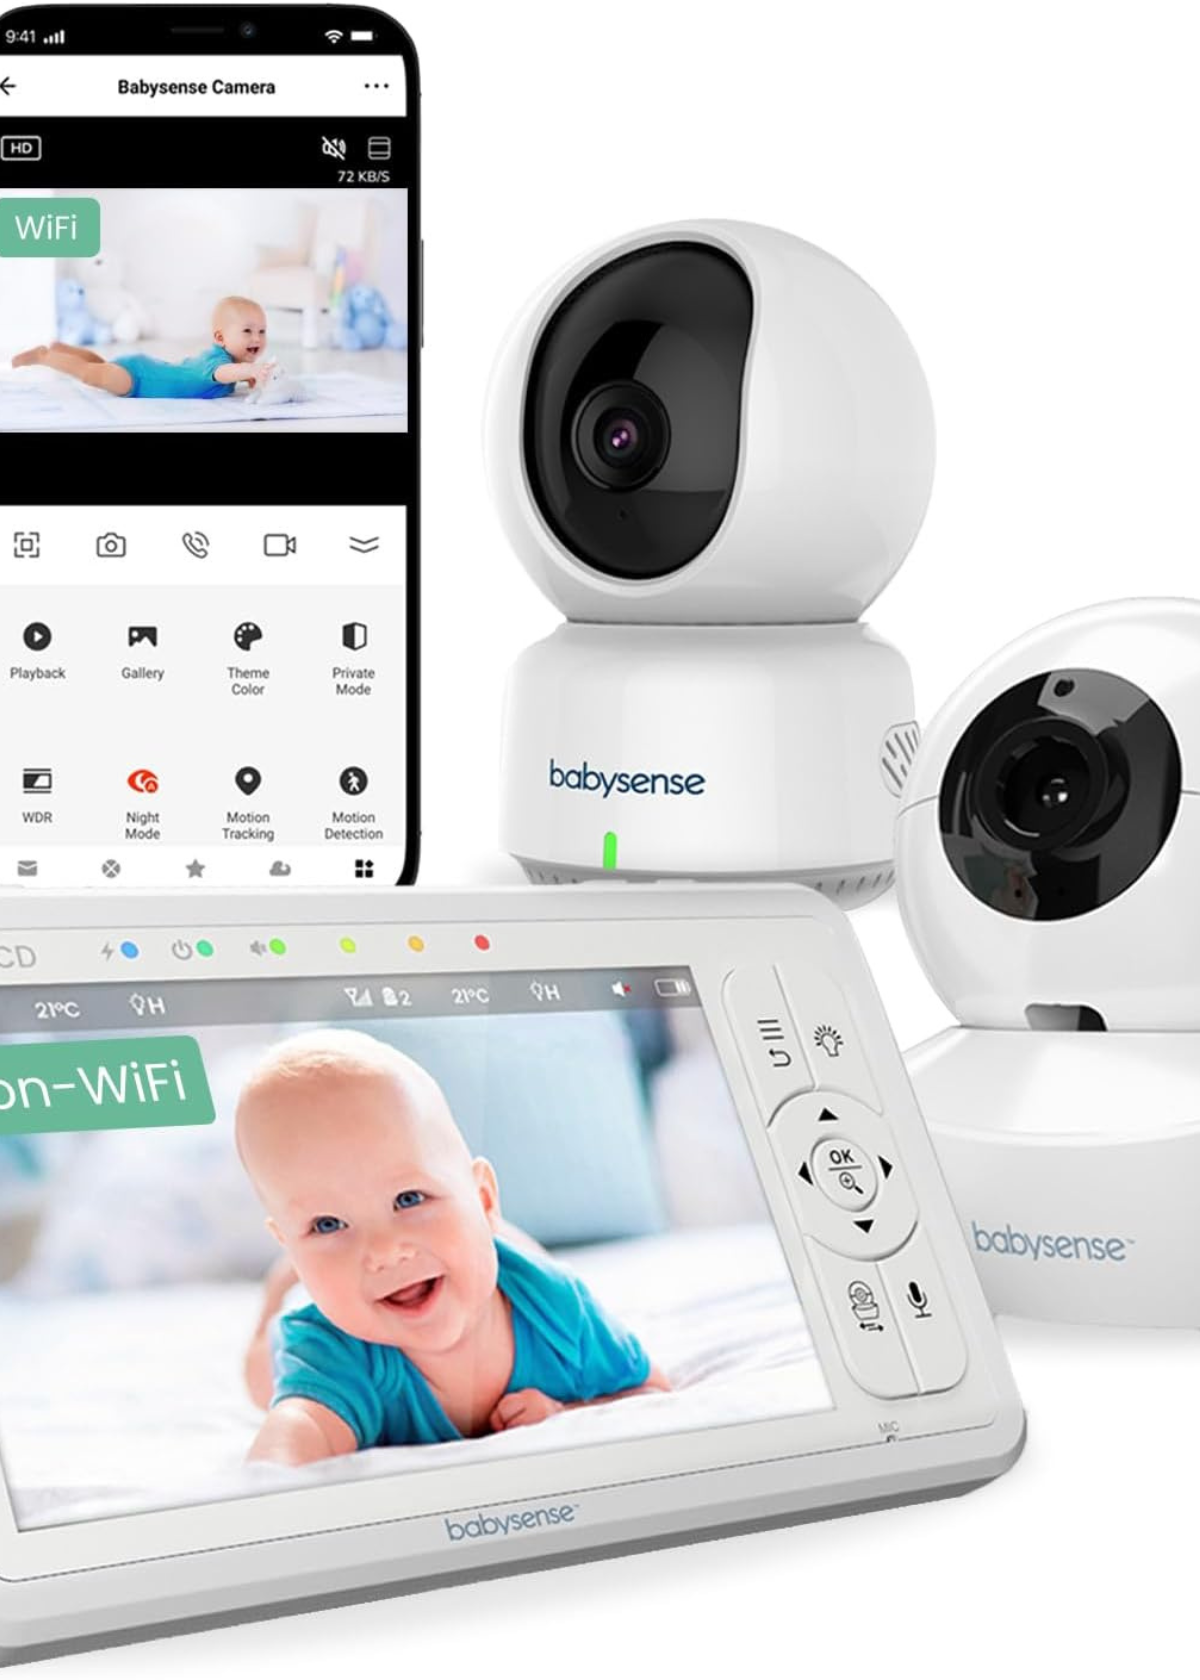 How Do Non-Wi-Fi Baby Monitors Work?